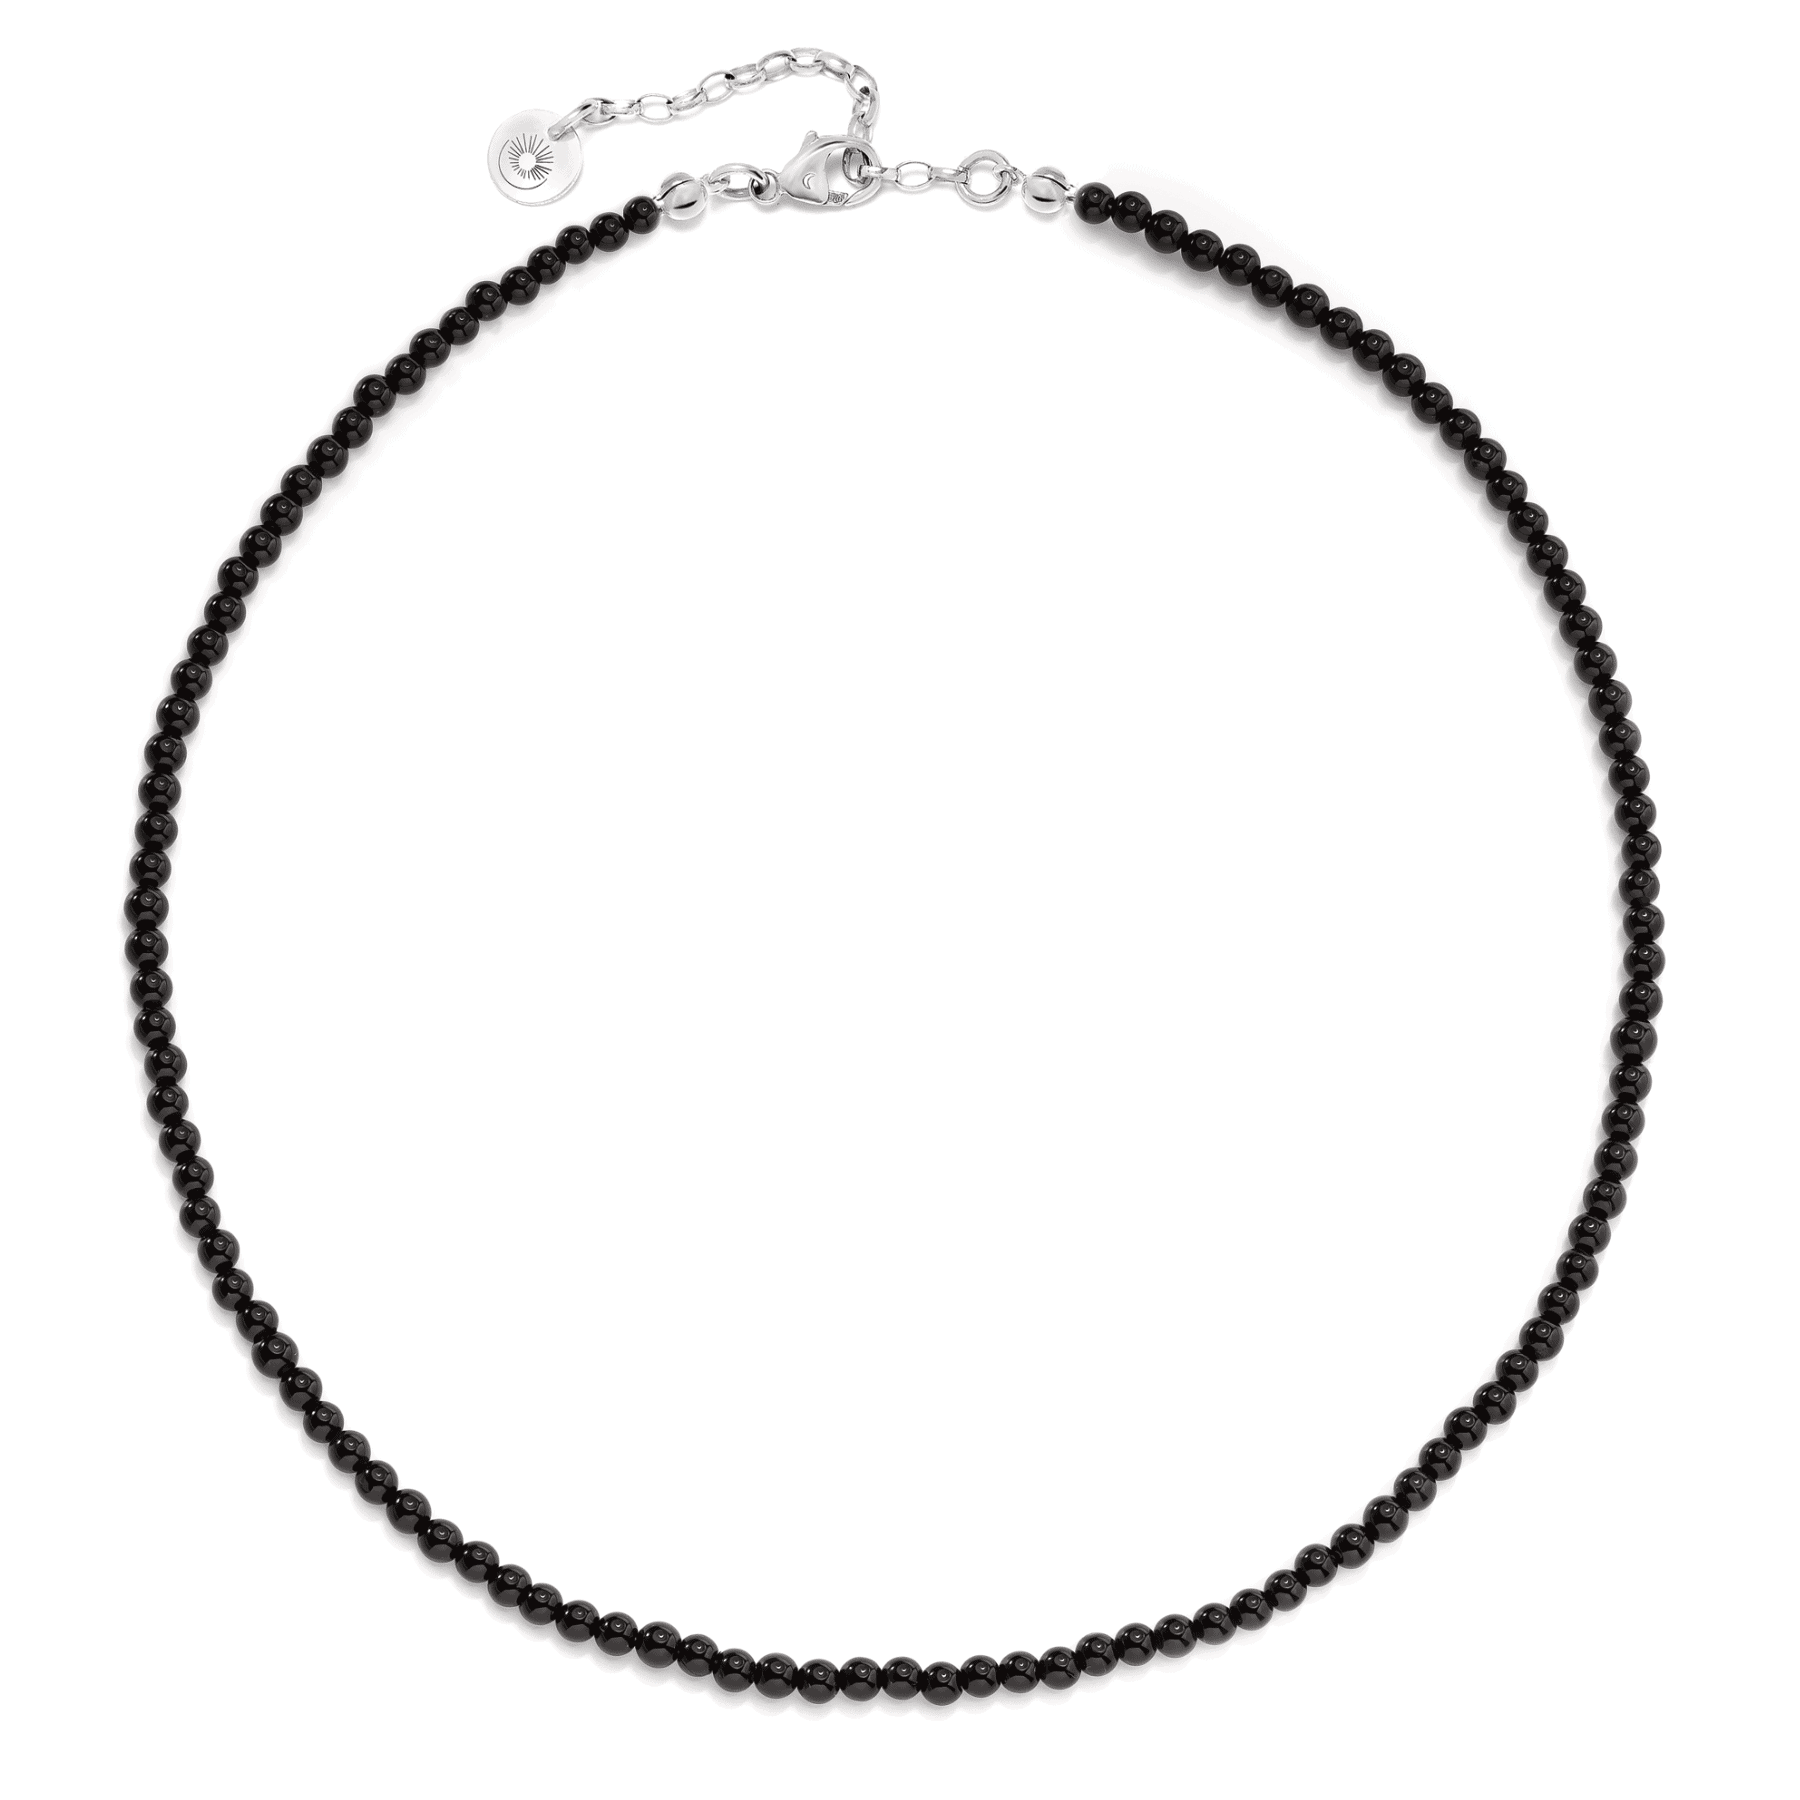 Black gemstones necklace choker with silver elements on white background